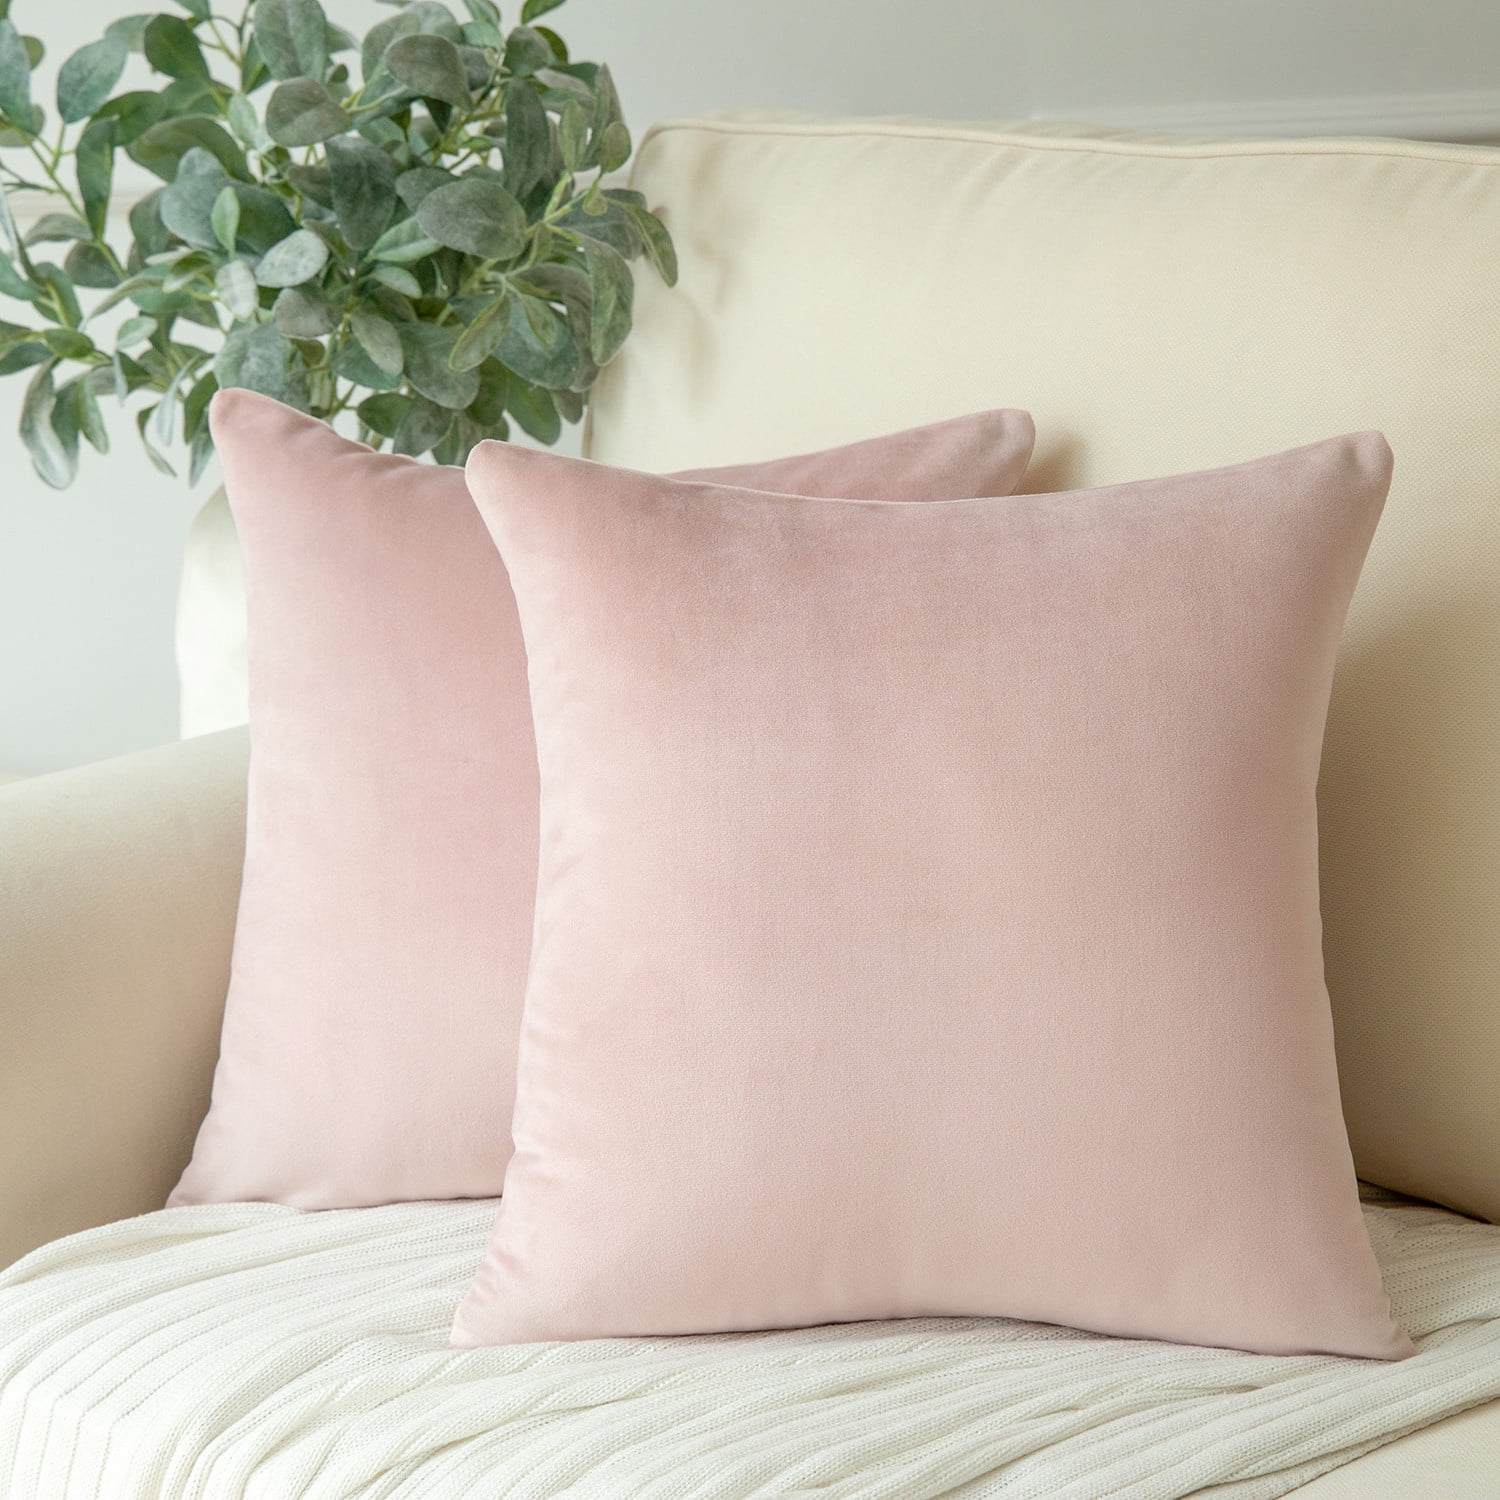 Phantoscope Soft Solid Square Velvet Decorative Throw Pillow Cover for Couch and Sofa, 18" x 18", Light Pink, 2 Pack